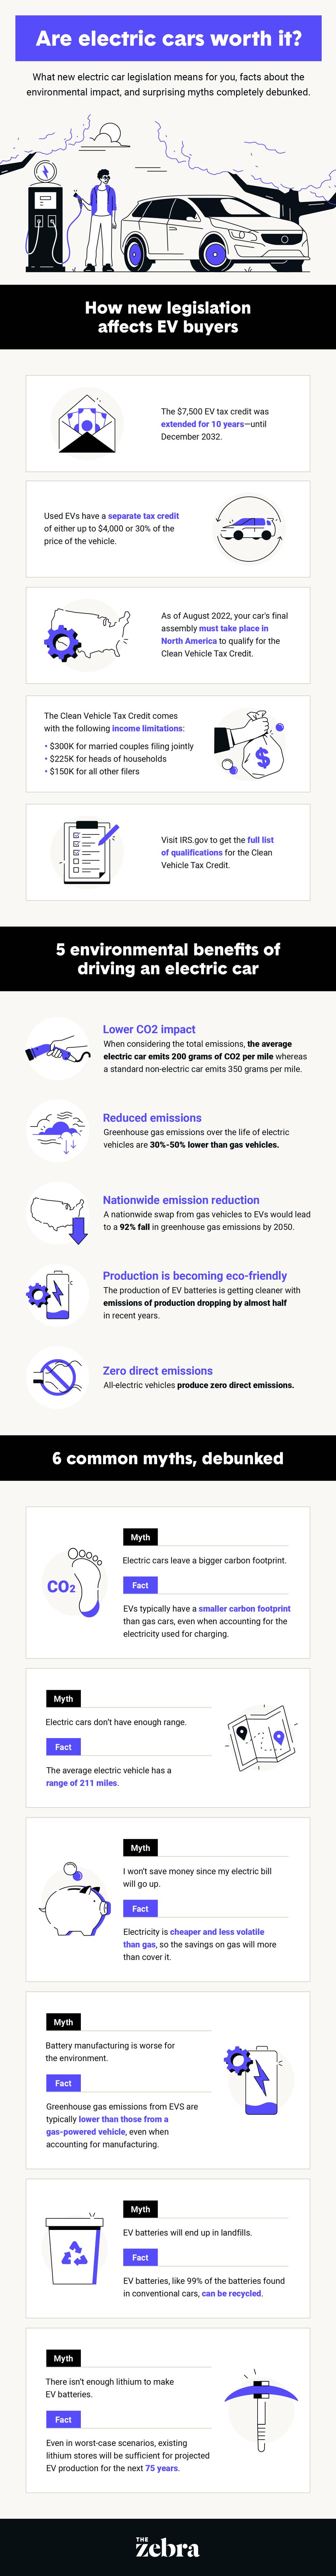 Infographic image debunking electric car myths and answering "are electric cars worth it?".